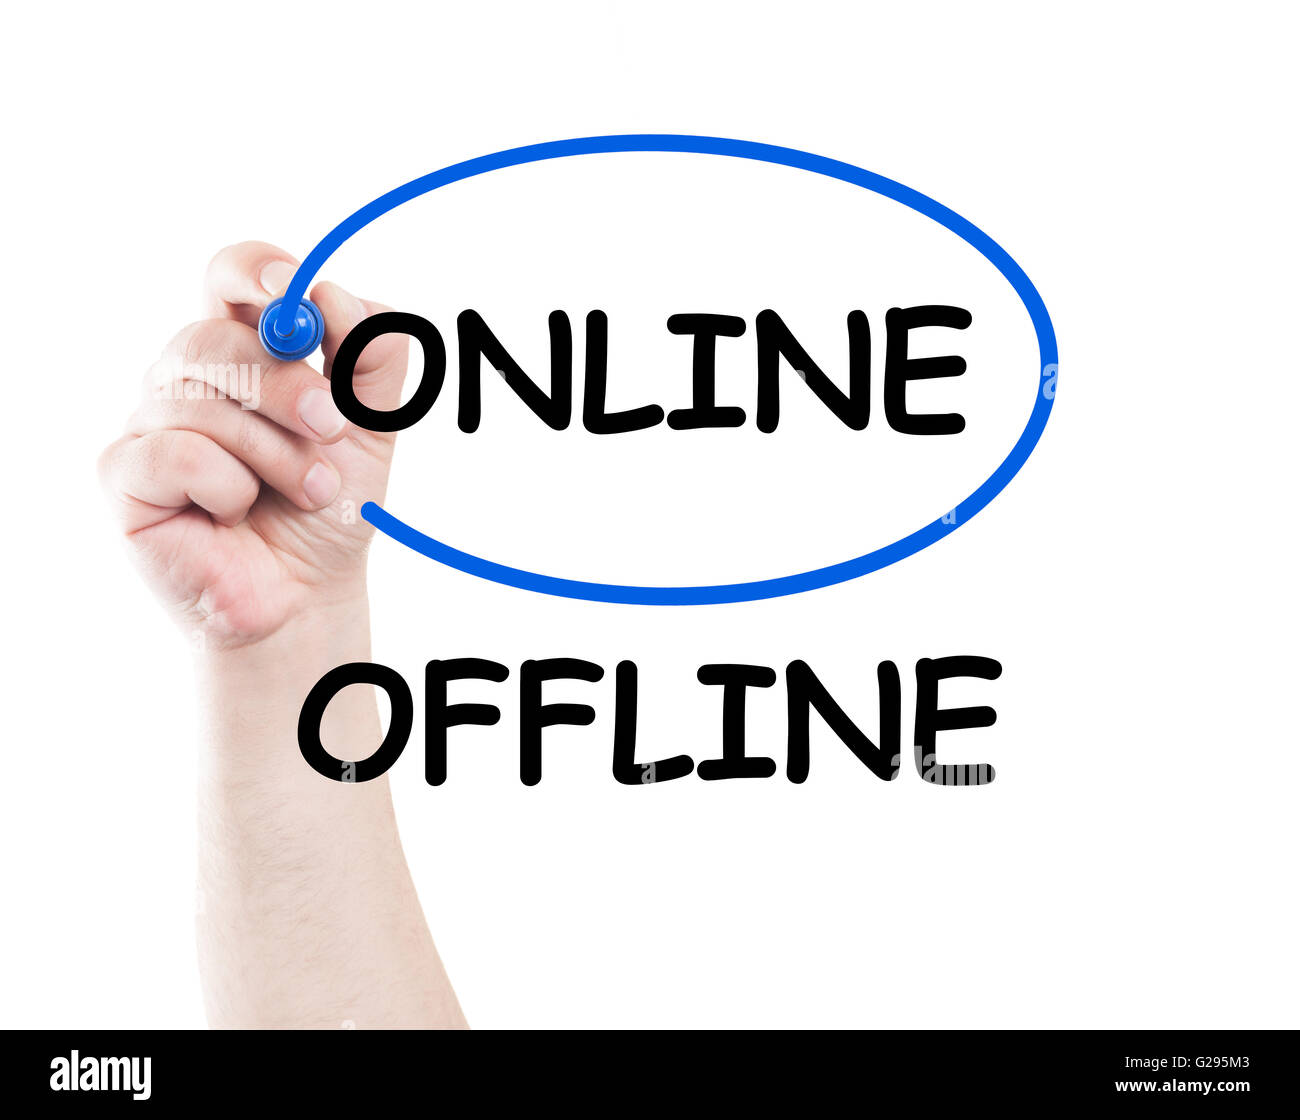 Online not offline concept made on transparent wipe board with a hand holding a marker Stock Photo